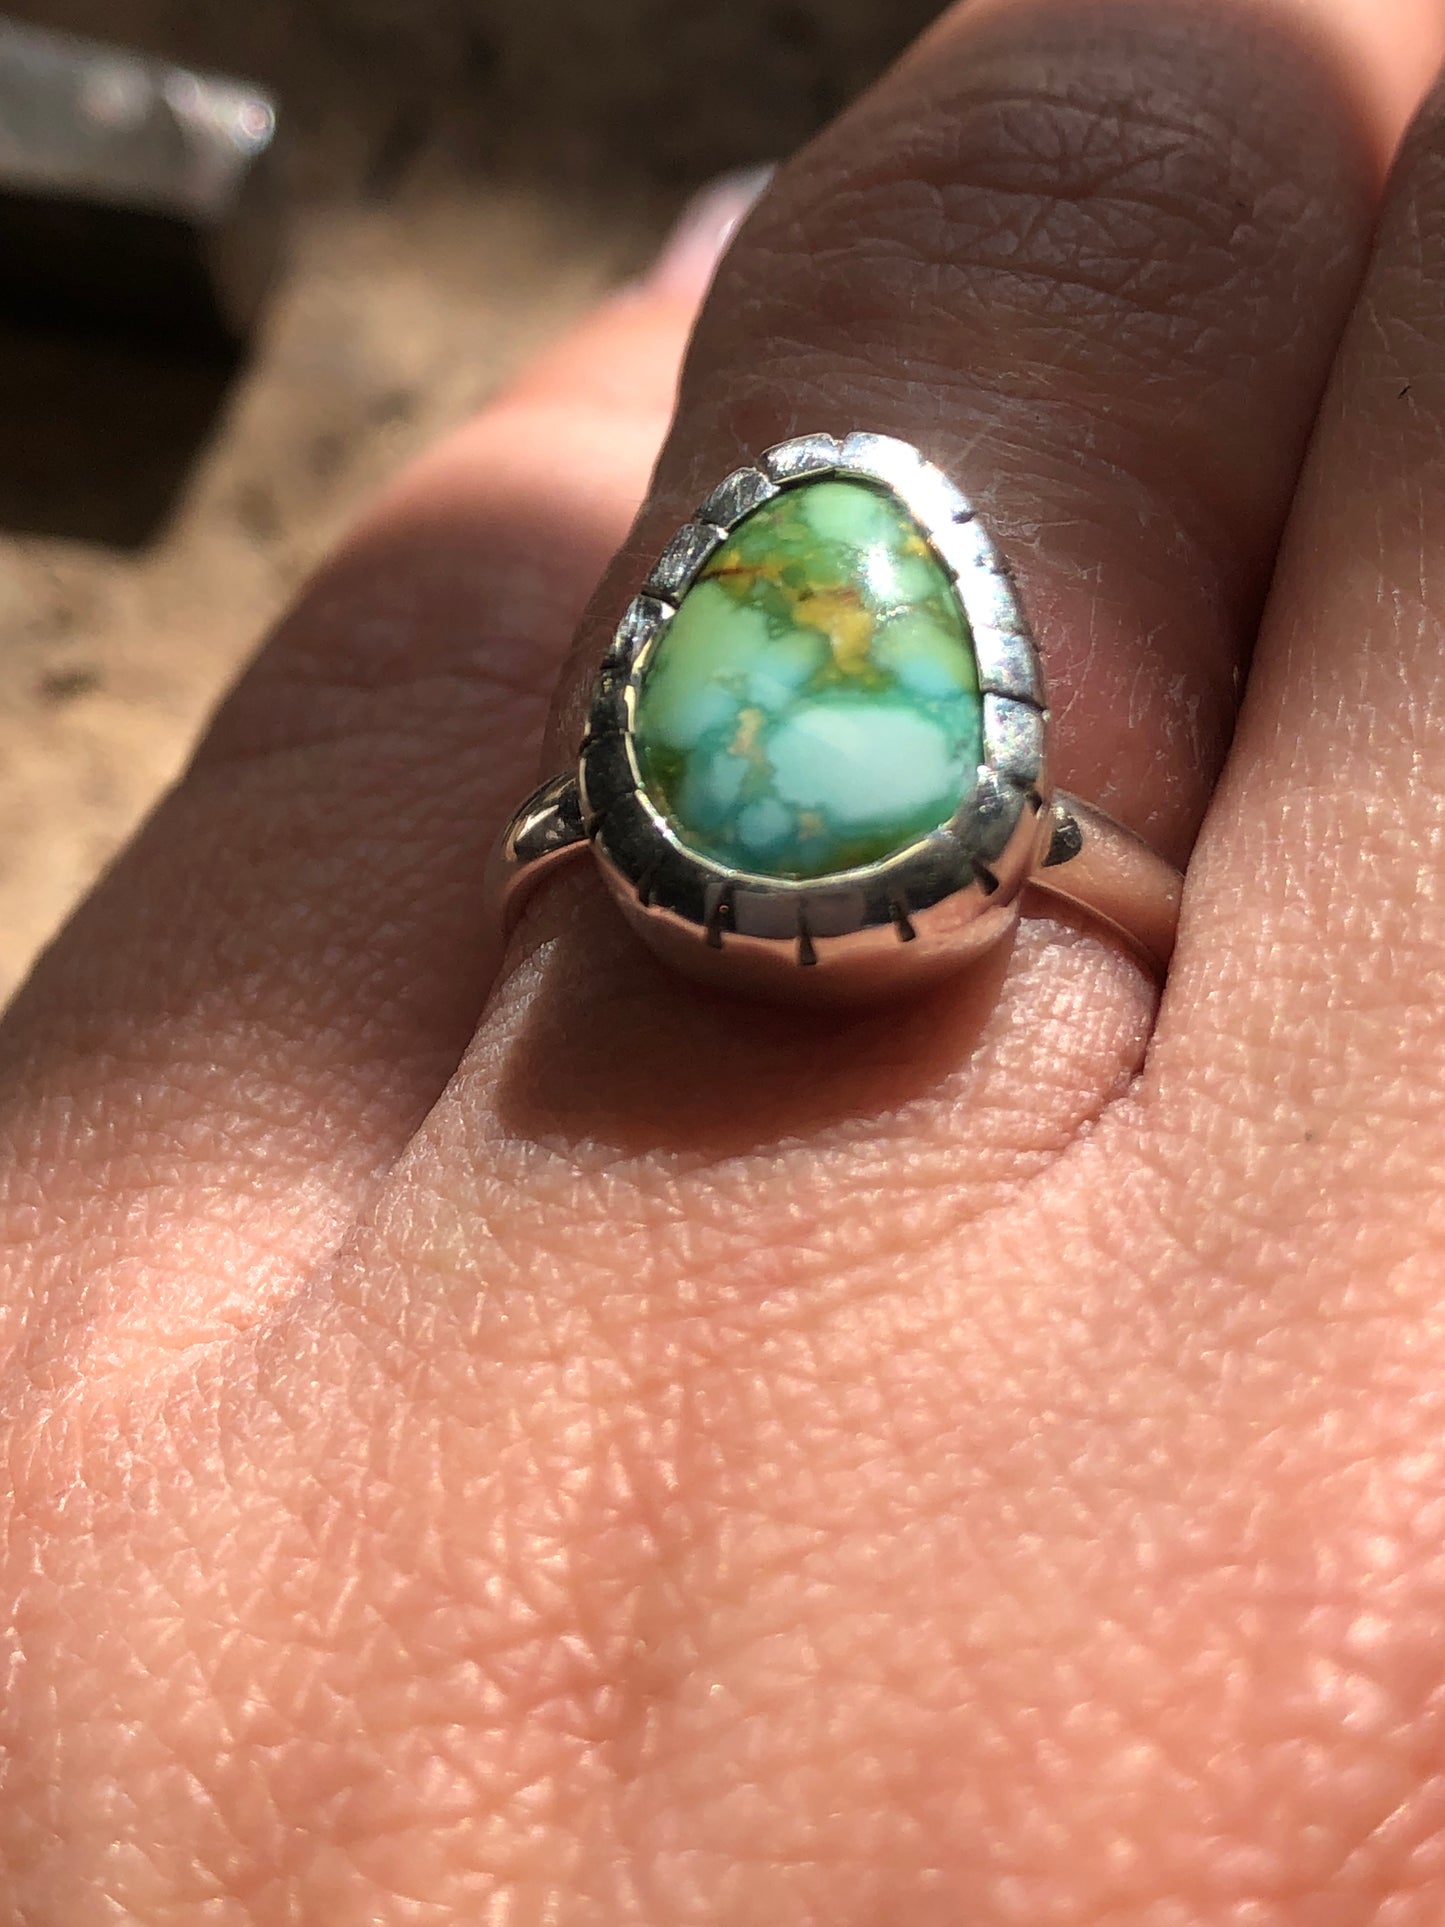 Sonoran Gold Turquoise Castellated Bezel Ring Size 6.5